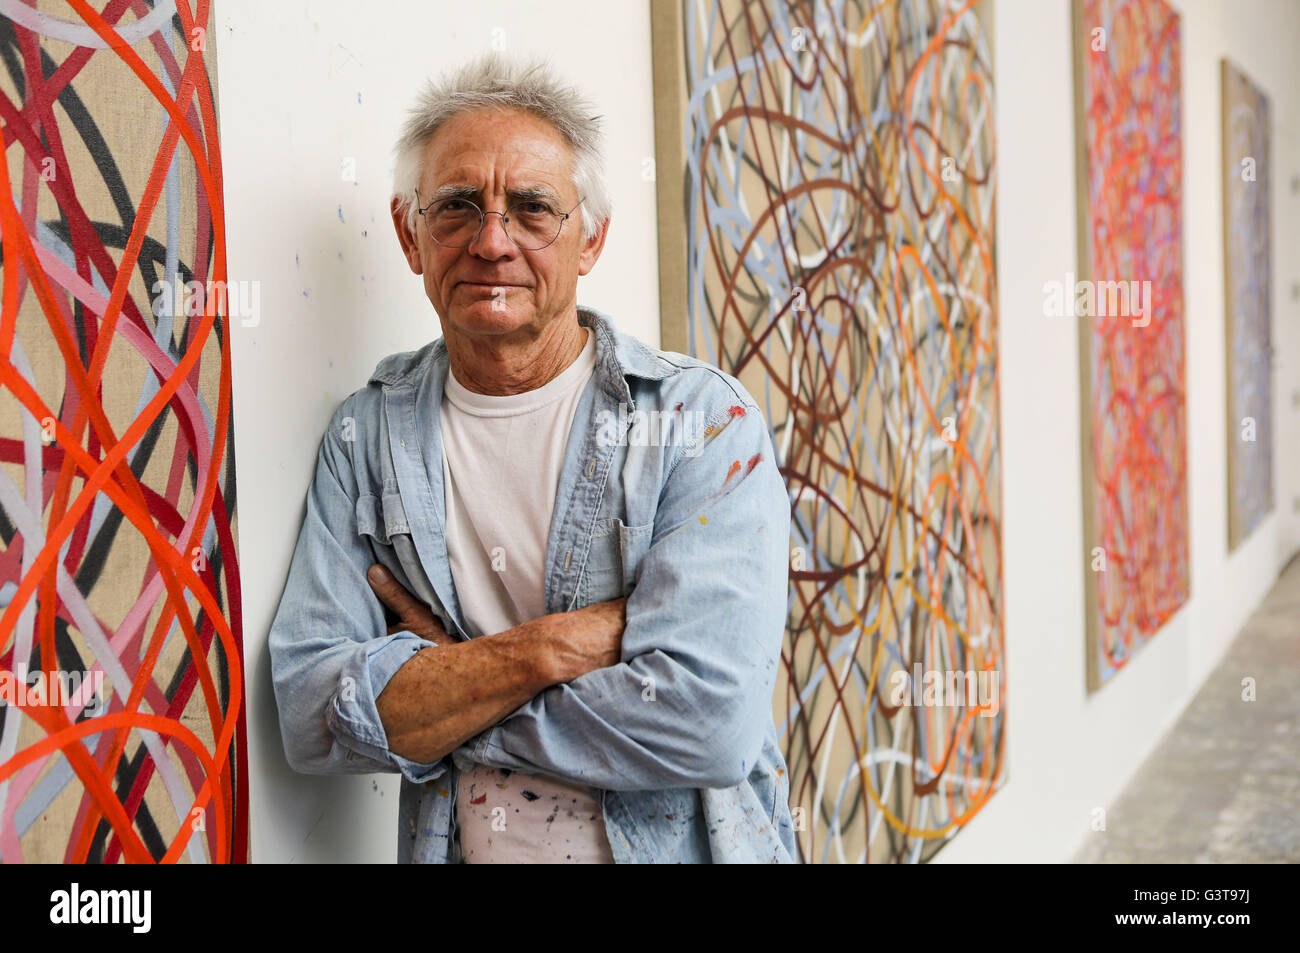 Los Angeles, California, USA. 23rd May, 2016. Charles Arnoldi, also known as Chuck Arnoldi and as Charles Arthur Arnoldi is an American painter, sculptor and printmaker. © Ringo Chiu/ZUMA Wire/Alamy Live News Stock Photo